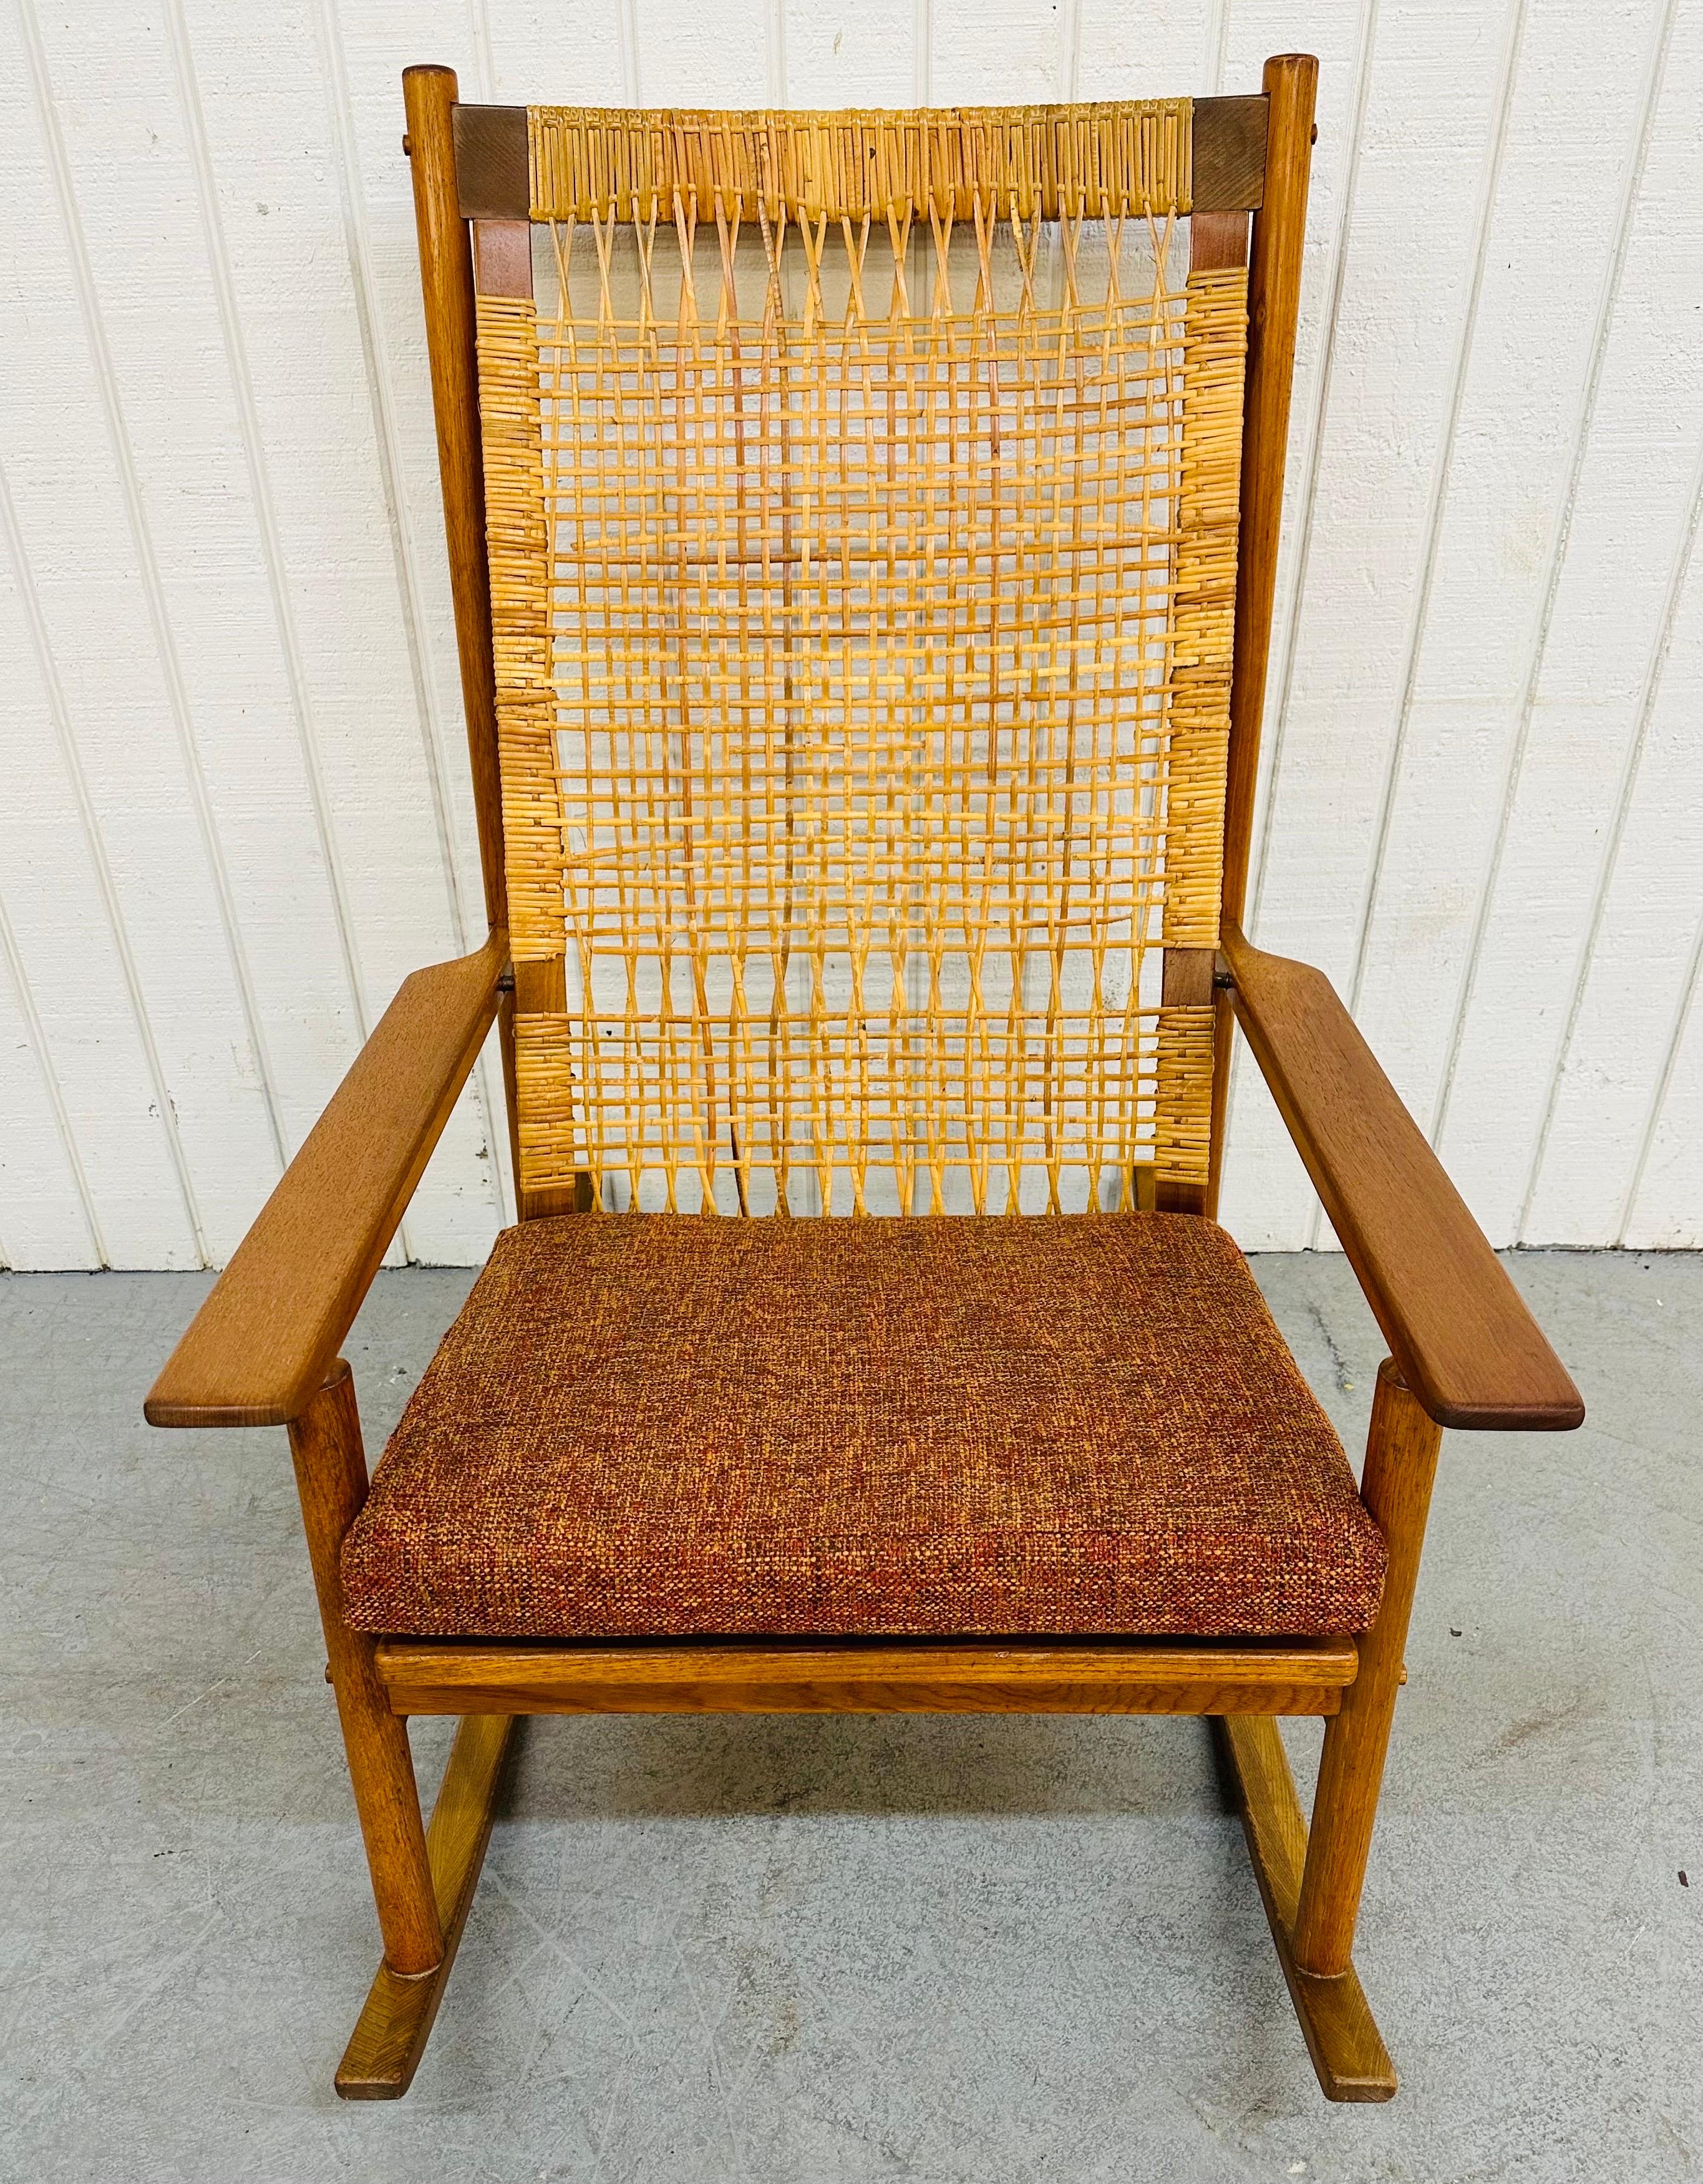 This listing is for a Mid-Century Modern Hans Olsen Teak Rocking Chair. Featuring a teak frame, woven back rest, and newly upholstered cushion. This is an exceptional combination of quality and design by Hans Olsen.